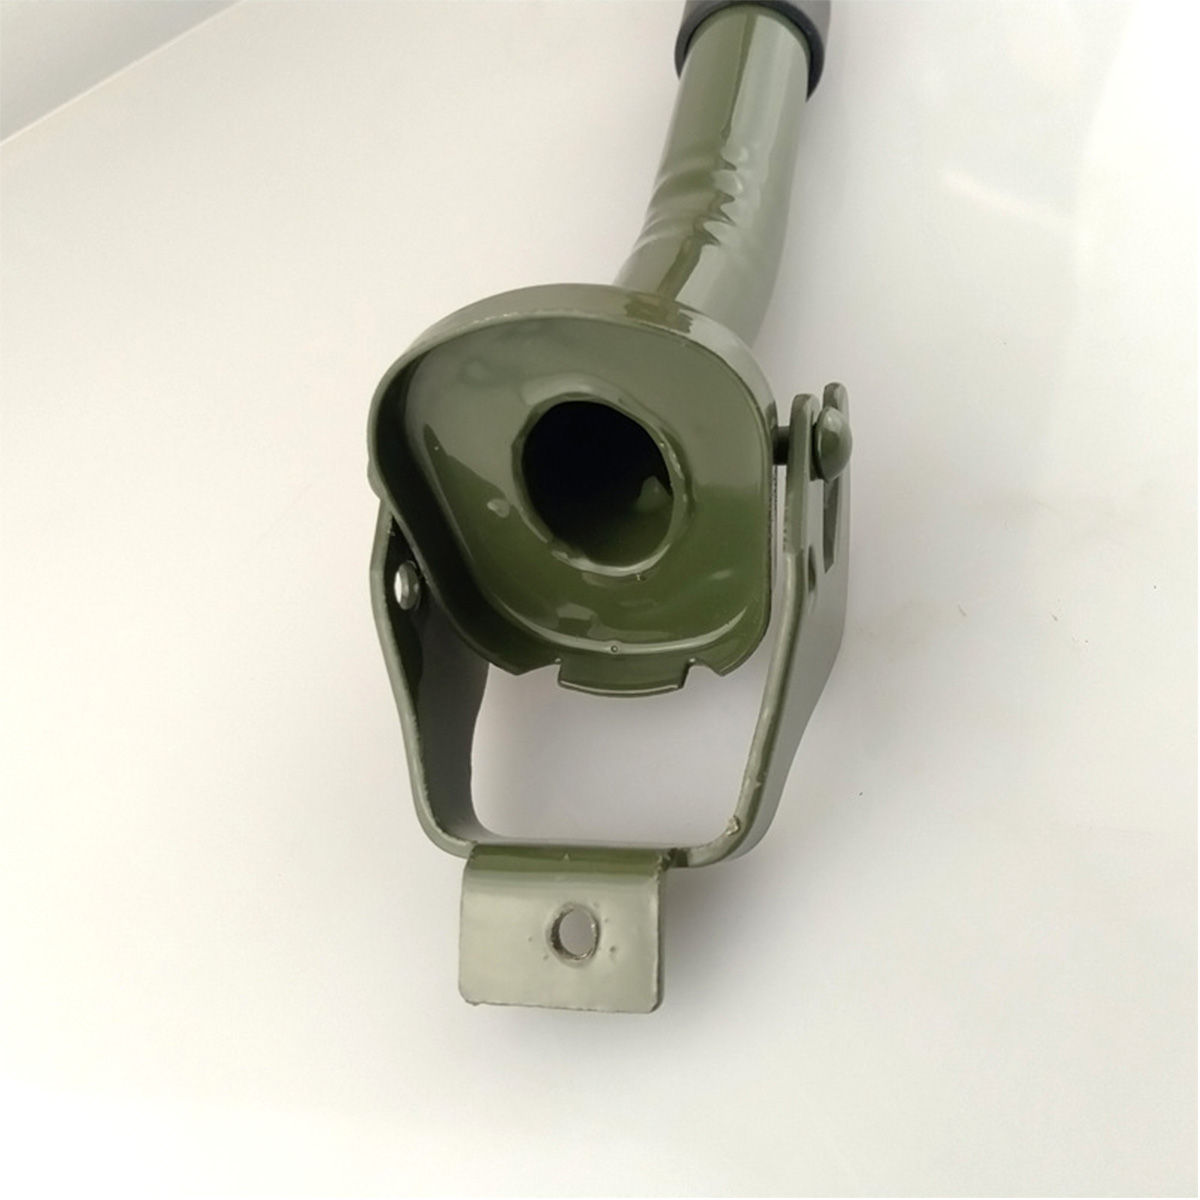 Black-Metal-Jerry-Can-Gas-Canister-Rubber-Nozzle-Spout-Military-Style-Clamp-20L-1600813-5